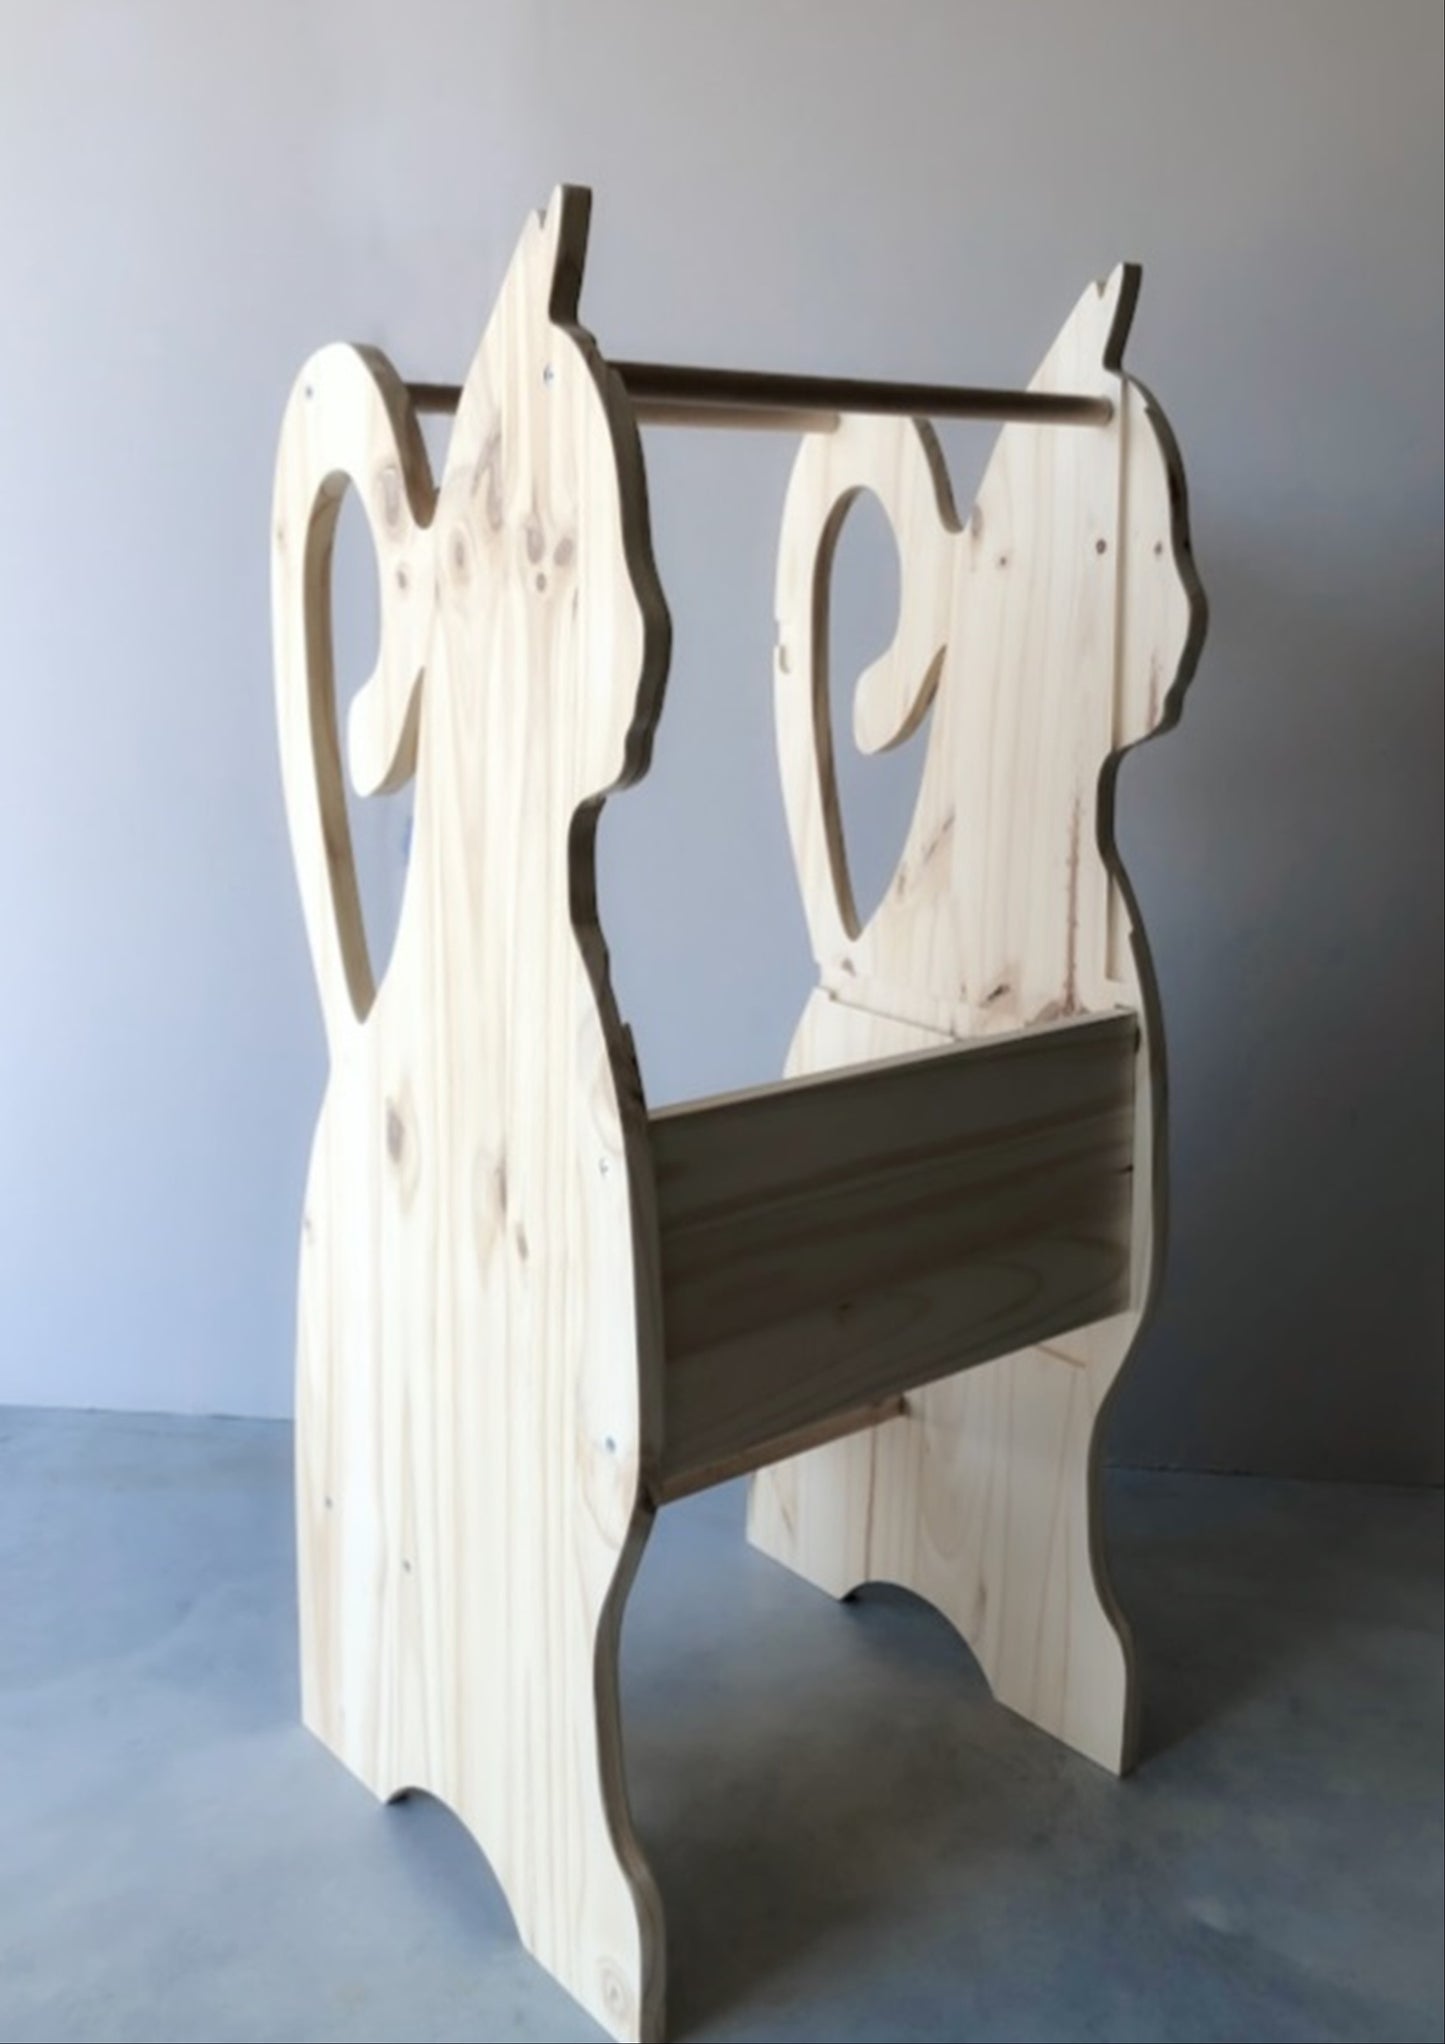 Scalable Montessori-inspired learning tower - FIL Mobilier